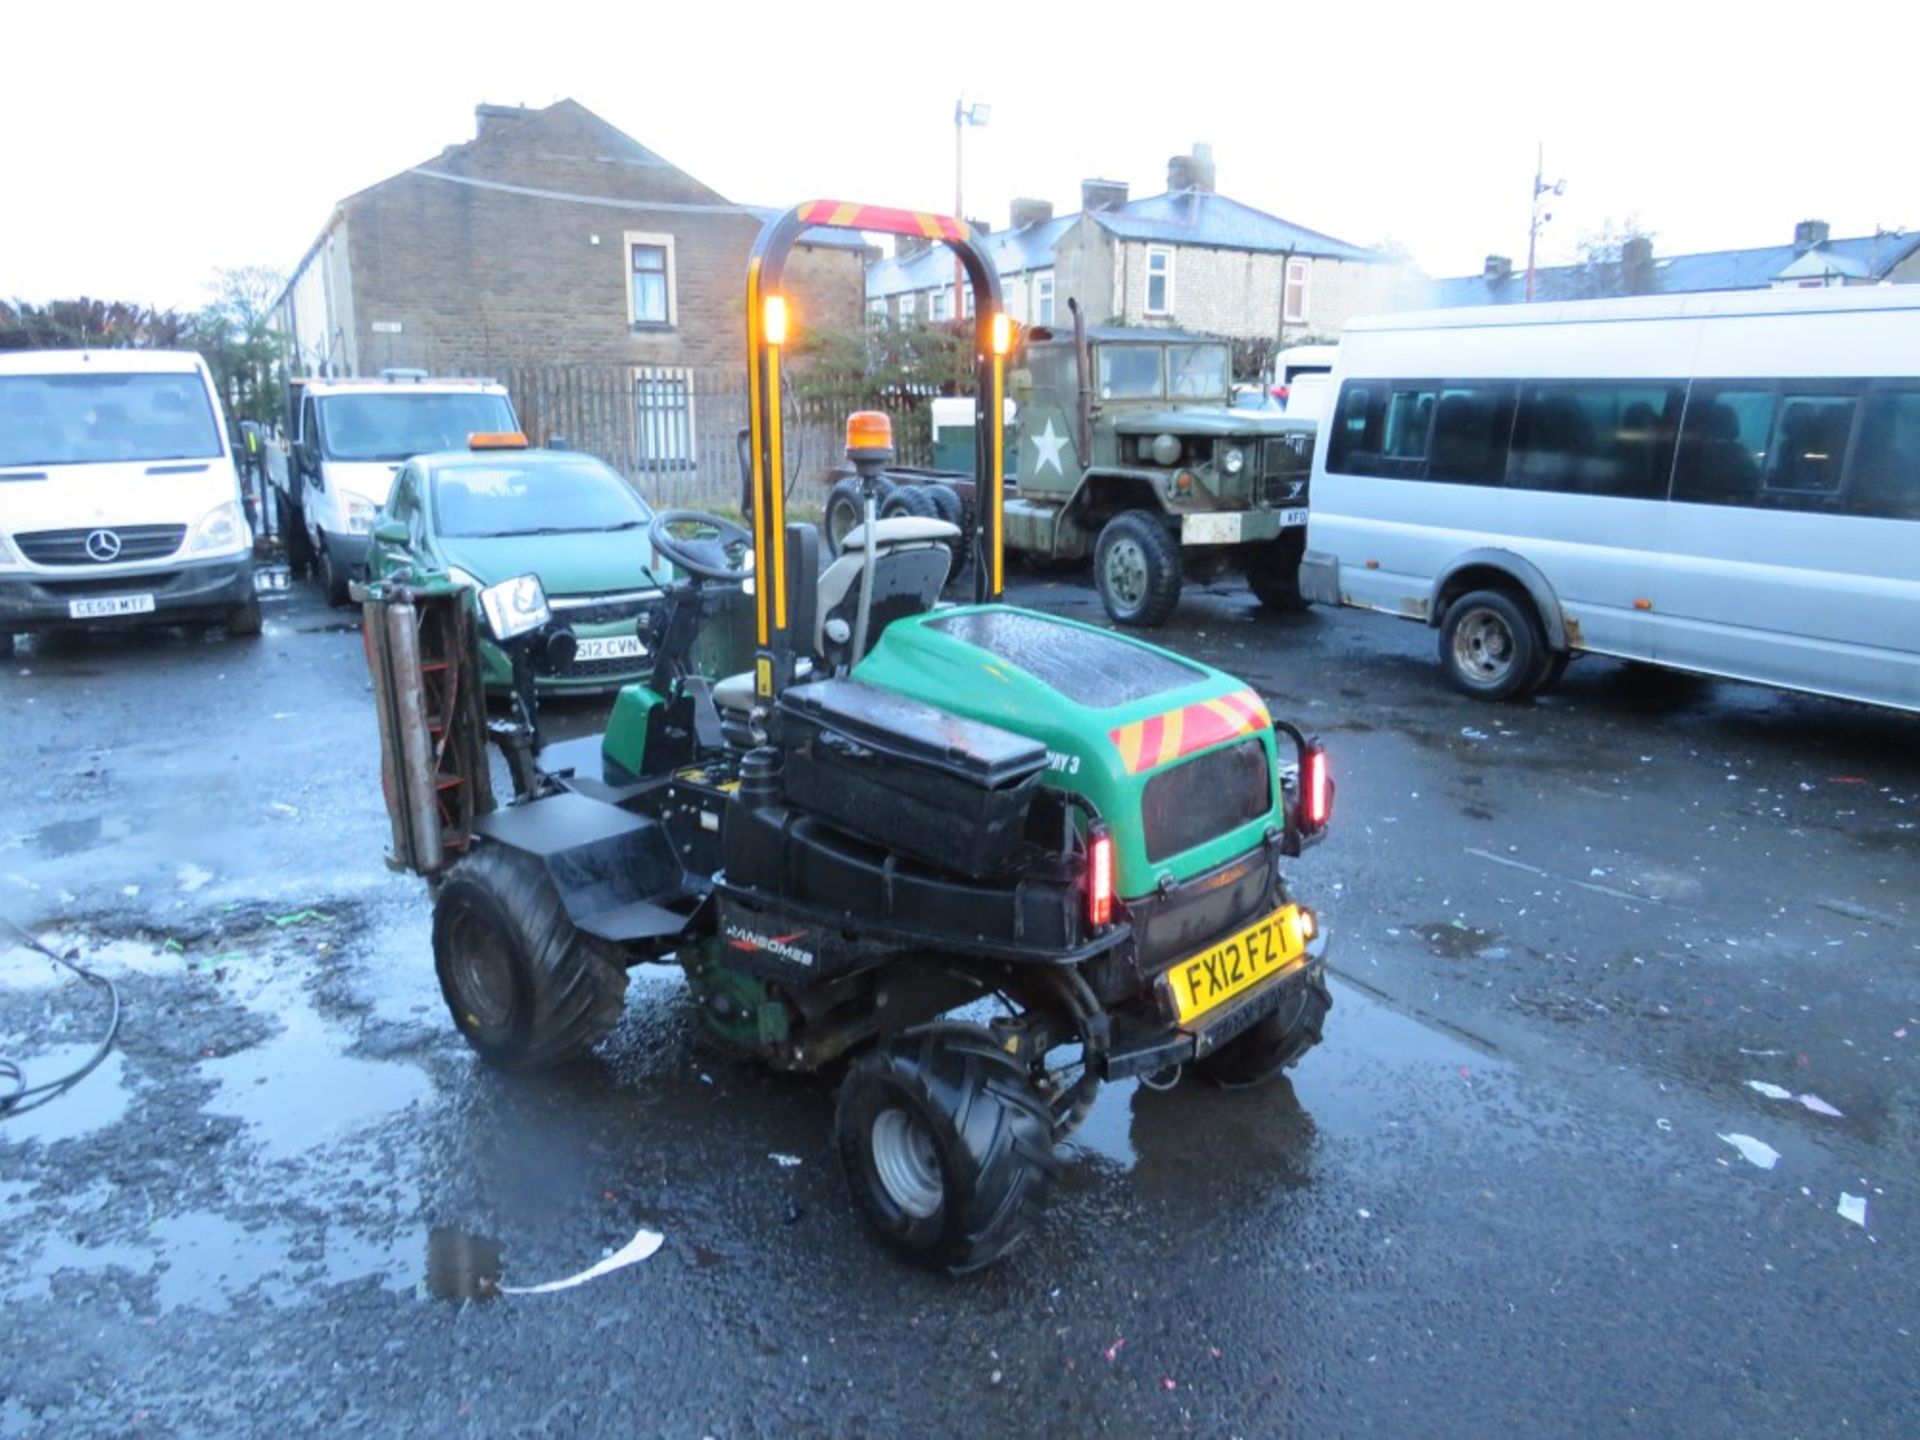 12 reg RANSOME PARKWAY 3 RIDE ON MOWER (DIRECT COUNCIL) 1ST REG 04/12, 1174 HOURS, V5 HERE, 1 FORMER - Image 3 of 4